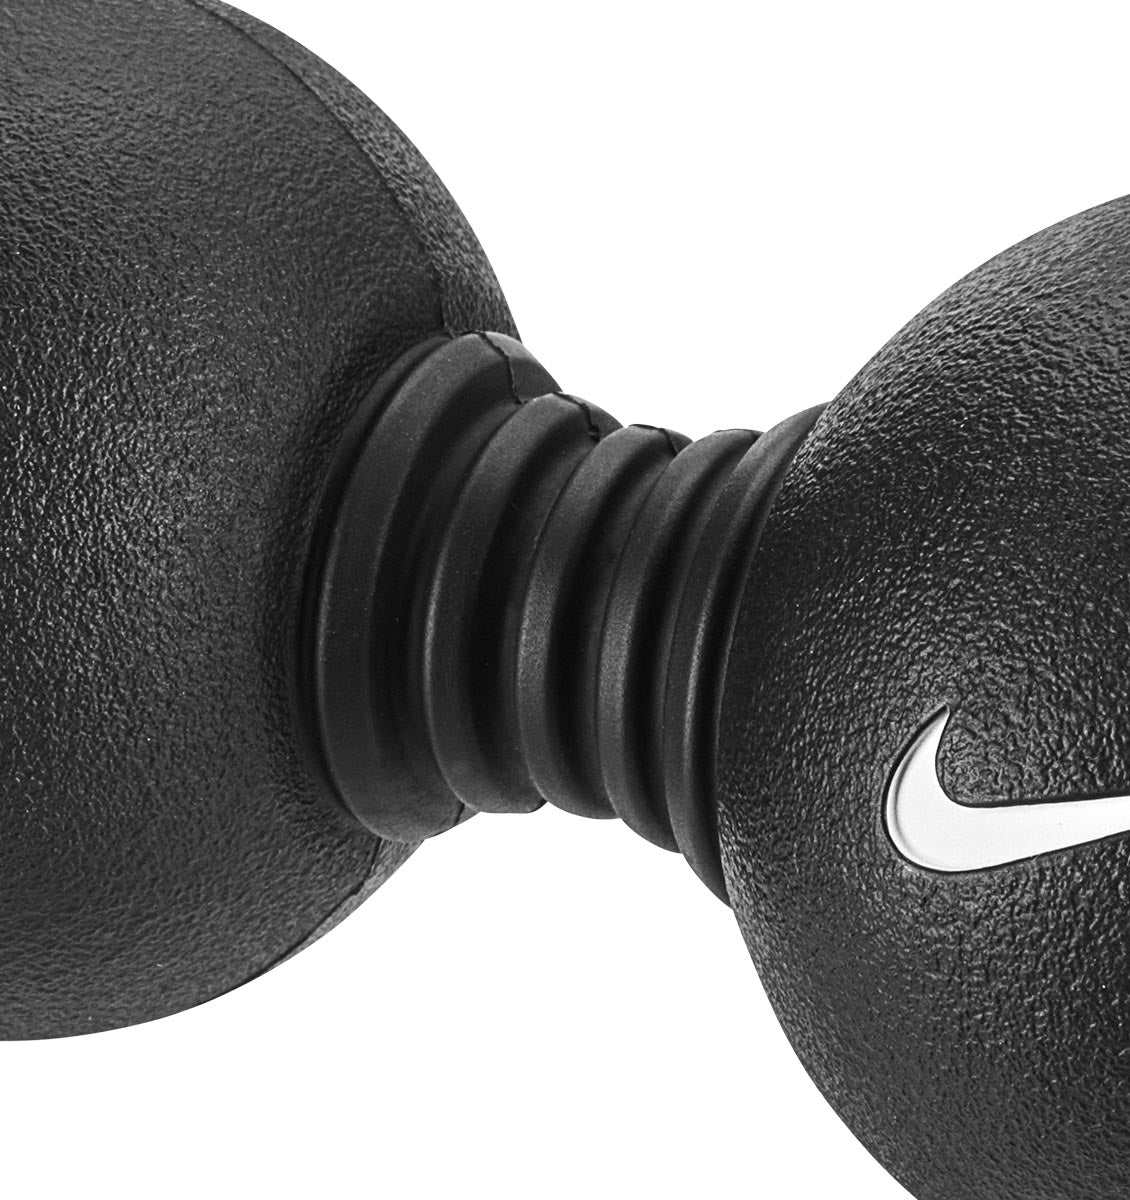 Nike Recovery Dual Roller Massage Ball - Black/White - 2